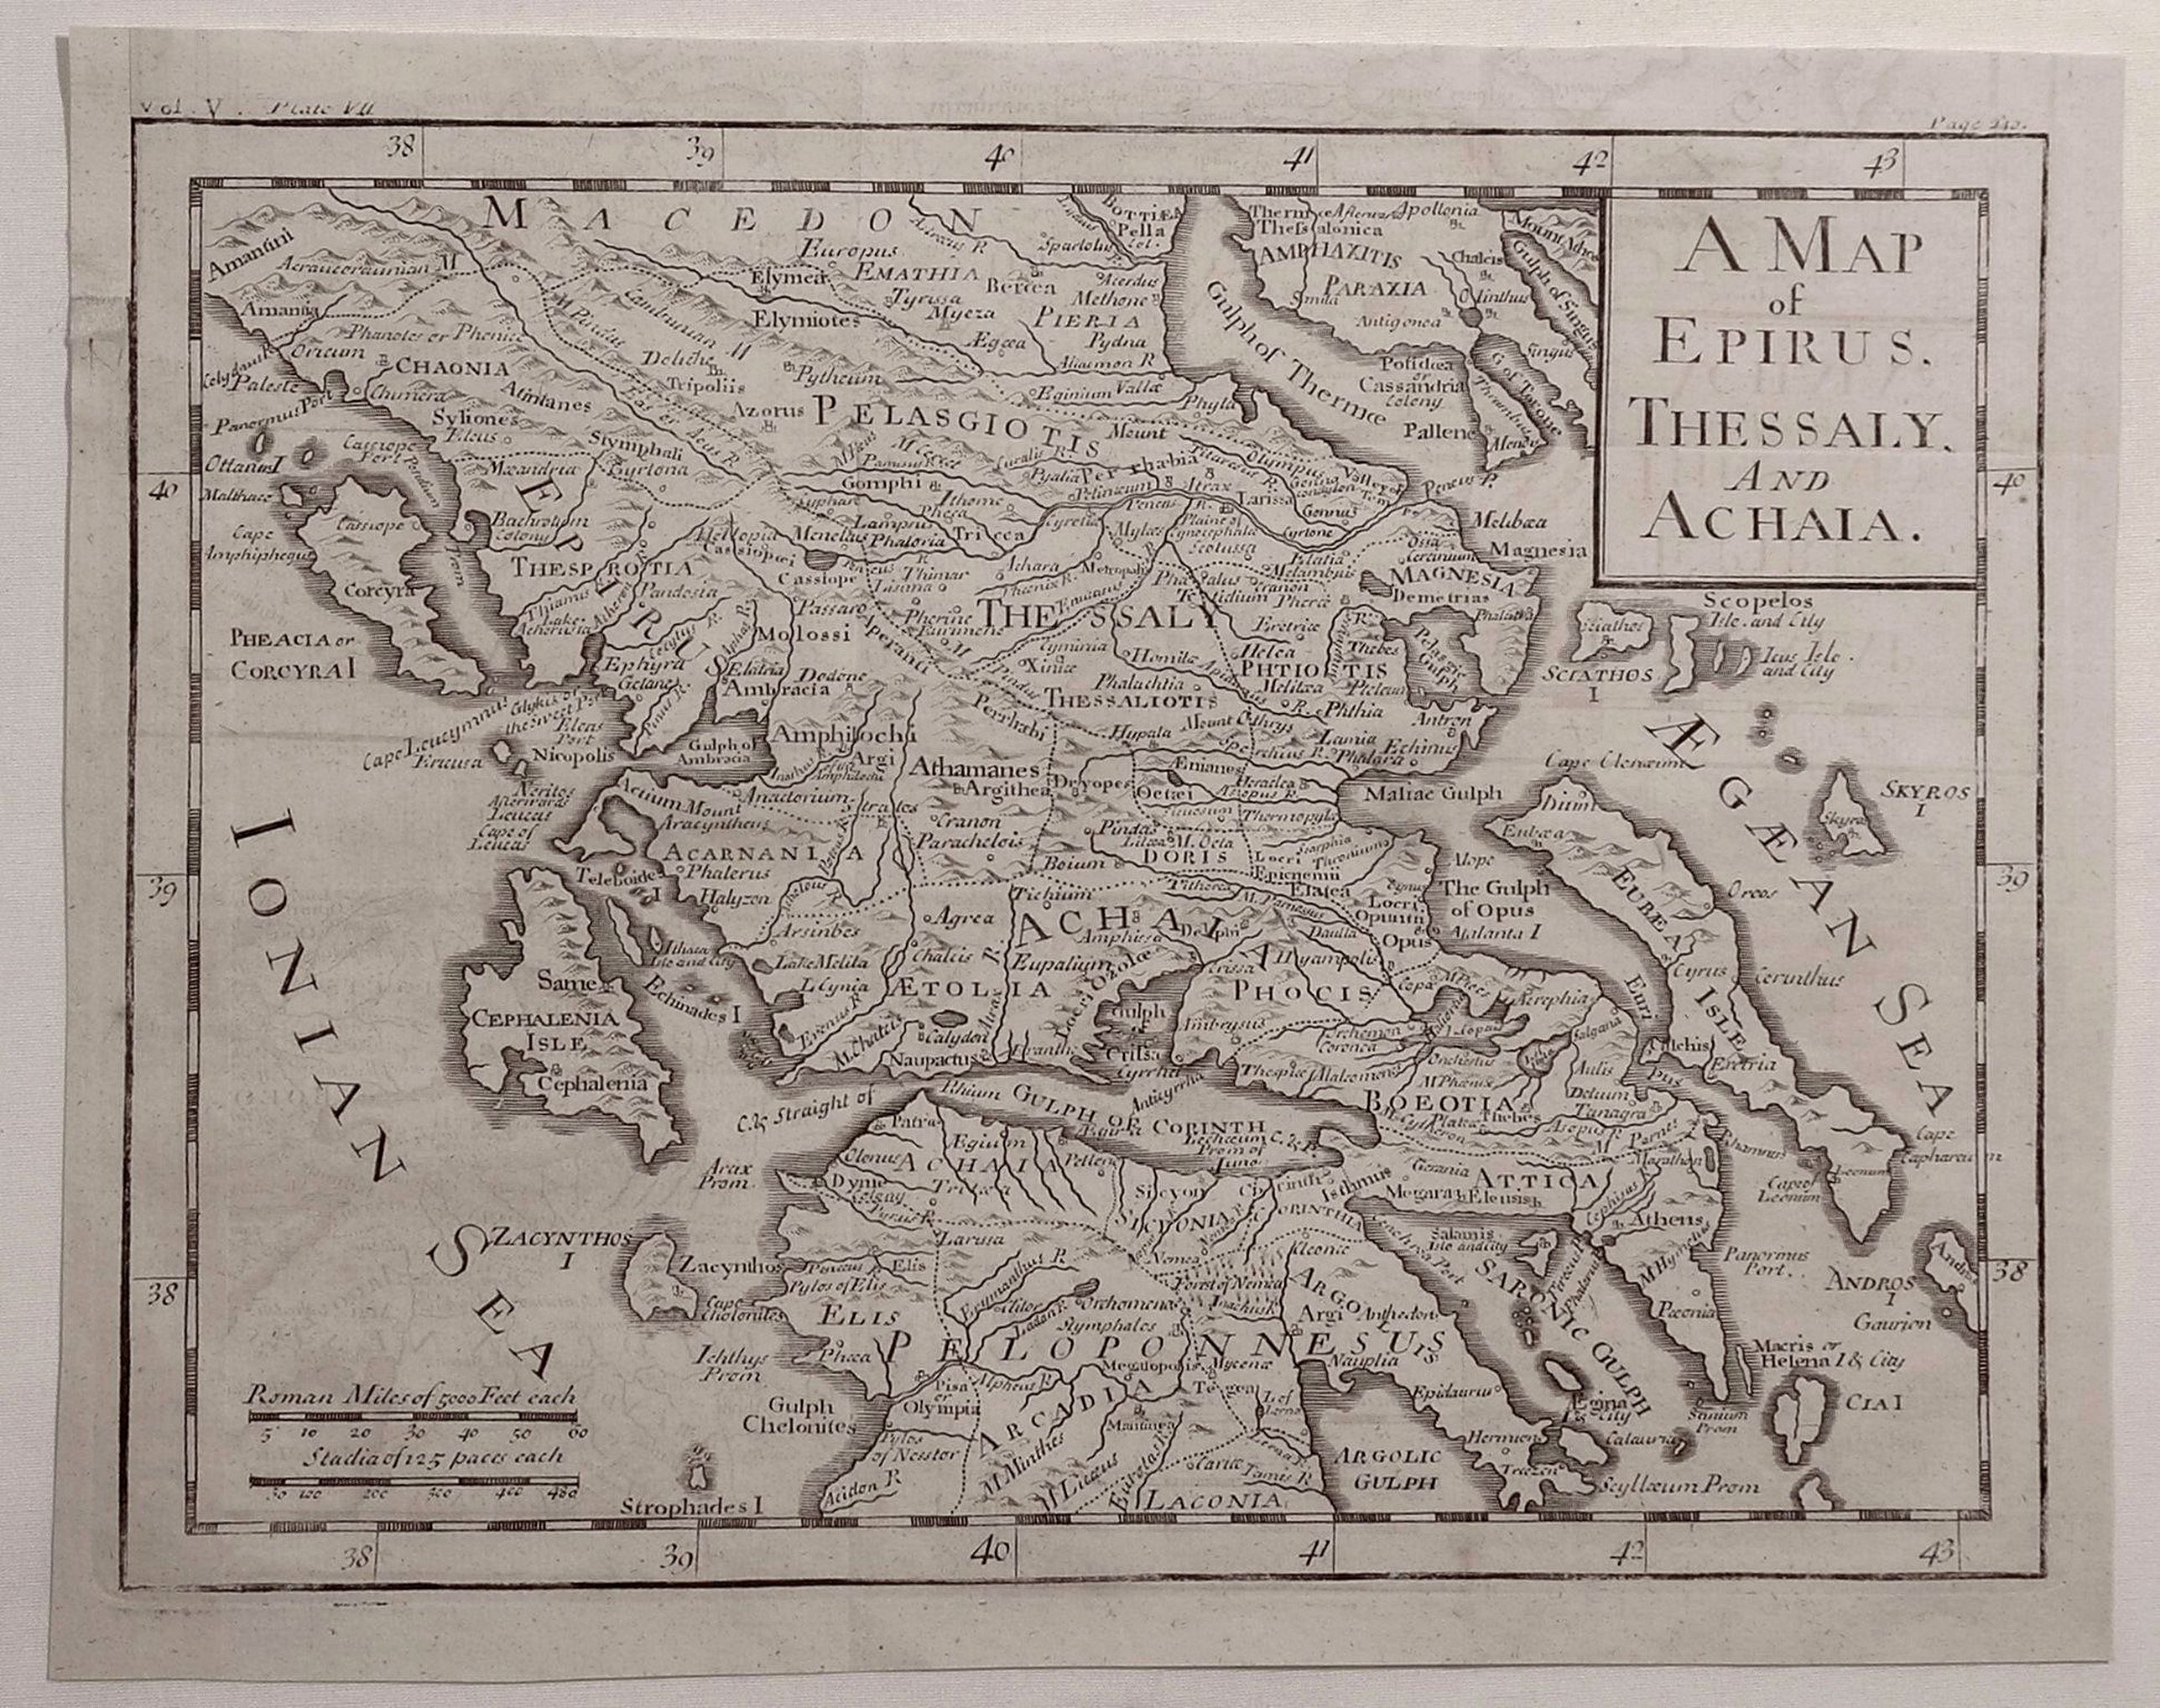 A Map of Epirus, Thessaly and Achaia.